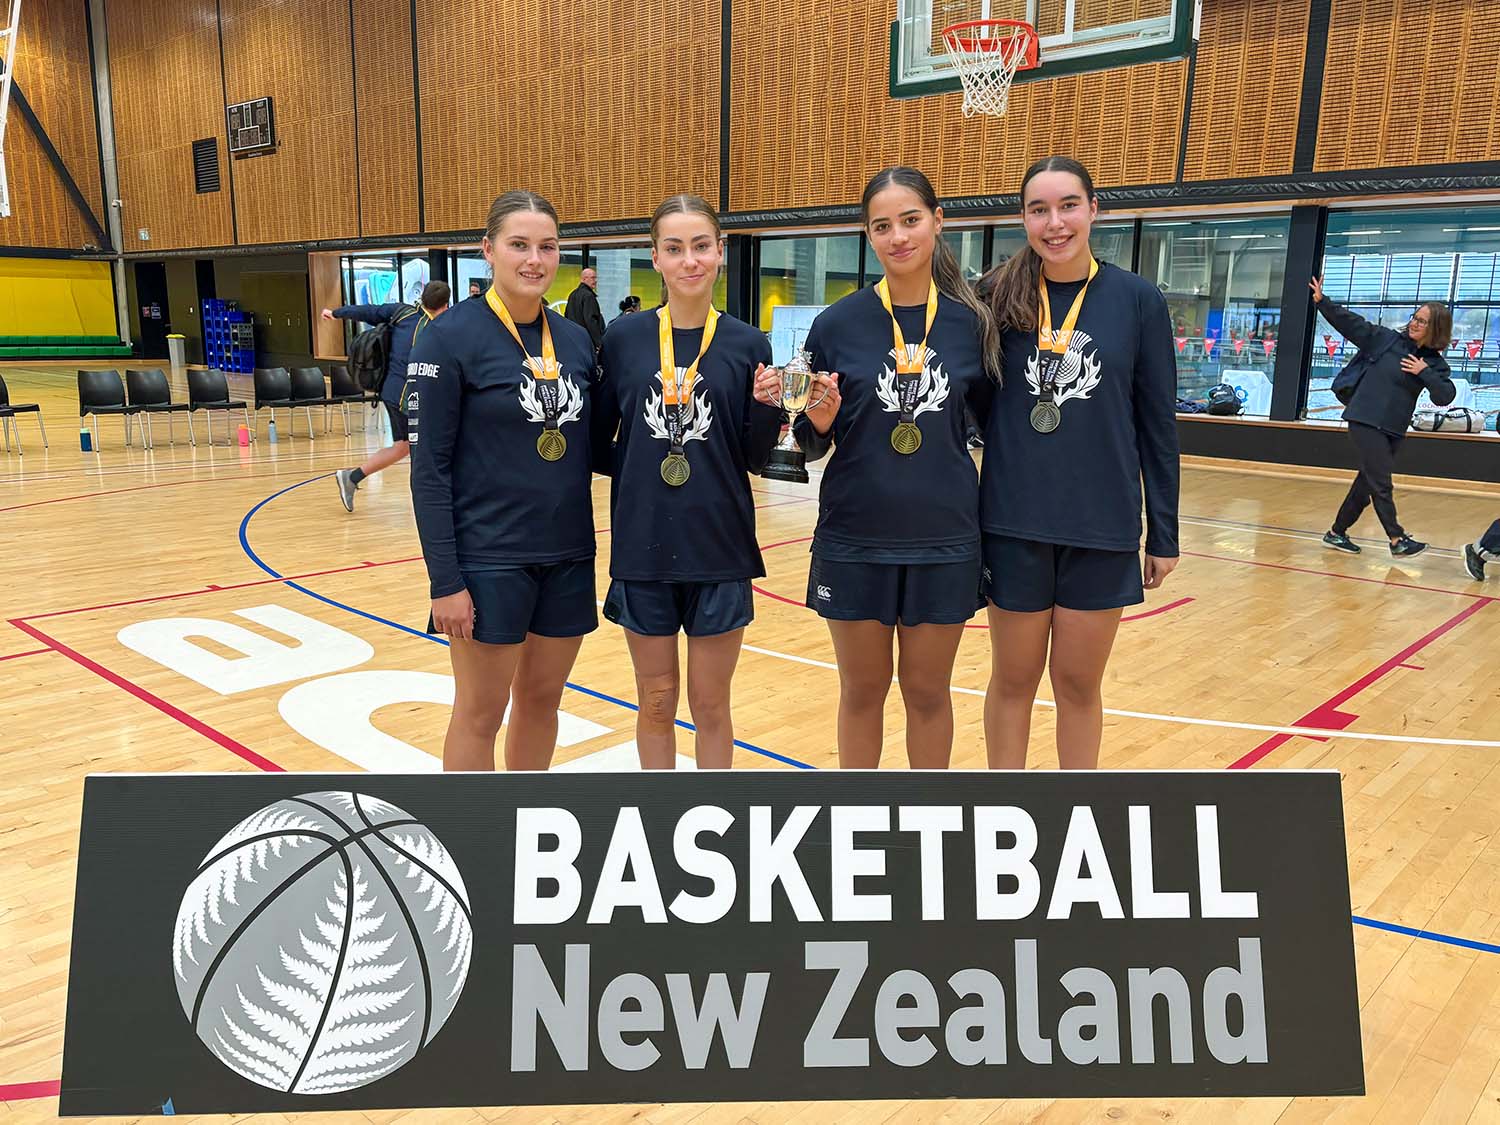 St Andrew's College Senior Girls 3x3 basketball team after winning the Basketball New Zealand Southern Regional 3x3 Championship.